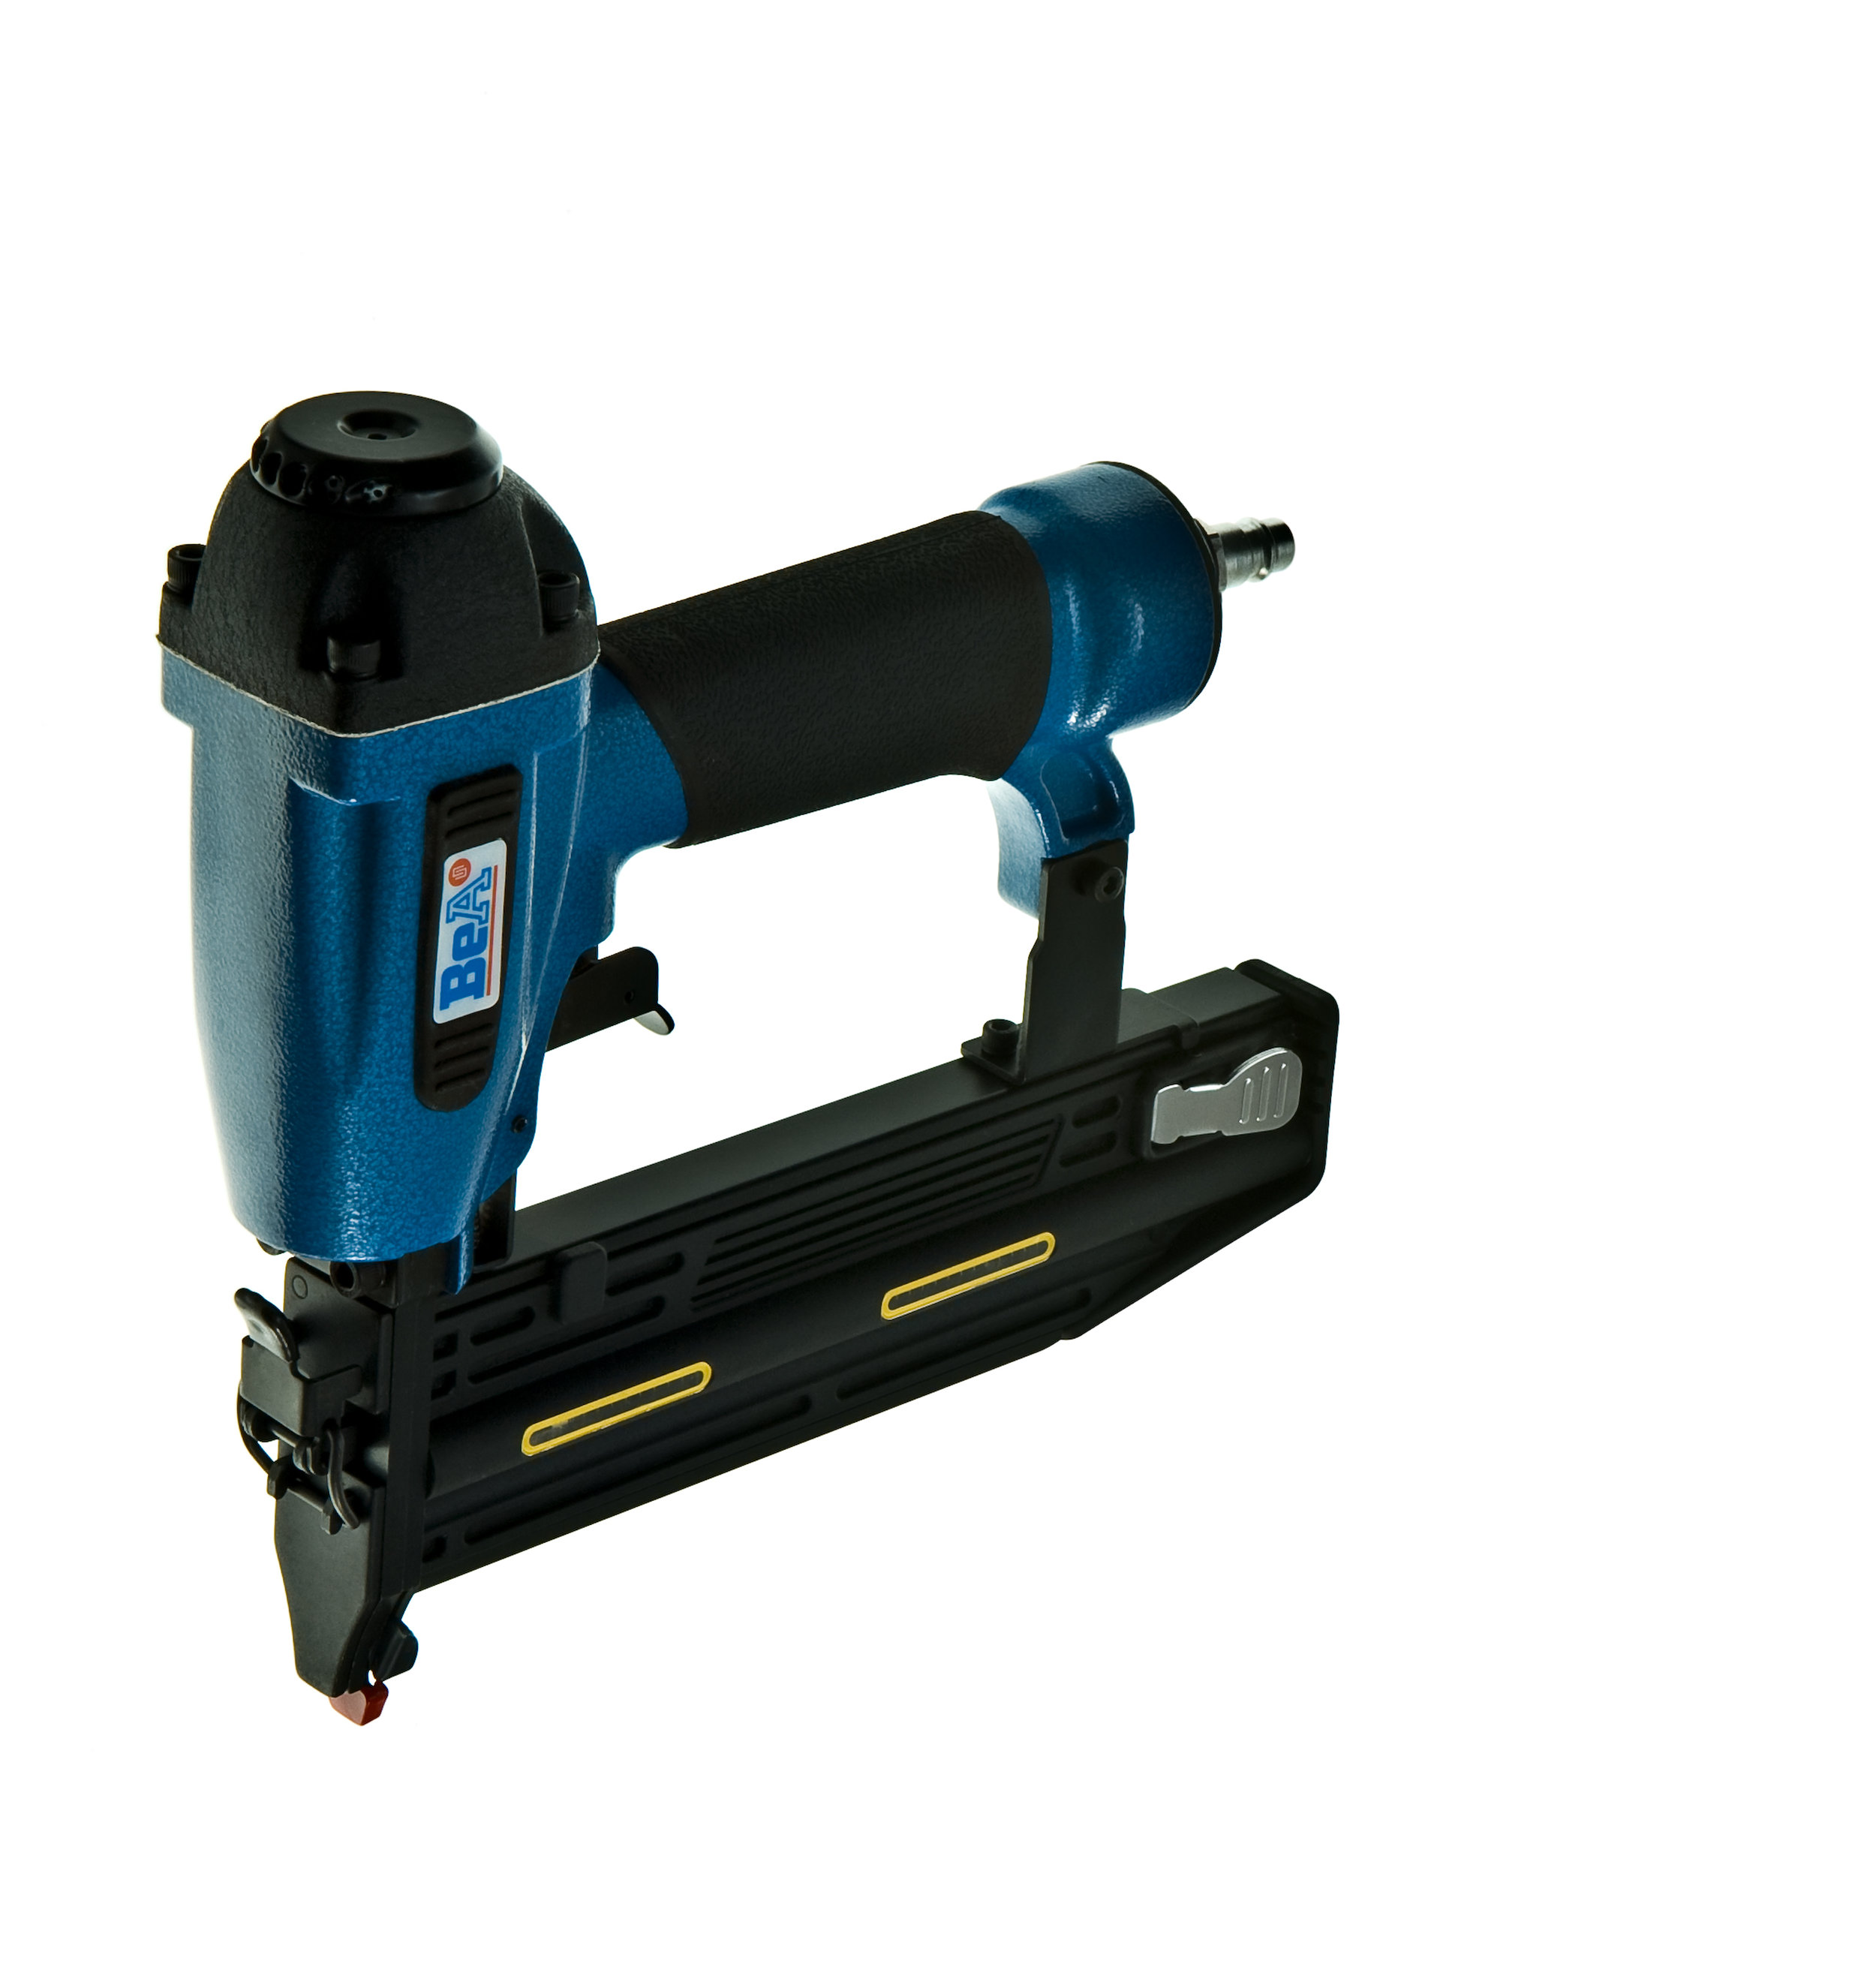 18 GAUGE 50MM BRAD AIR NAILER BY SACROFAST WITH 50MM BRADS 